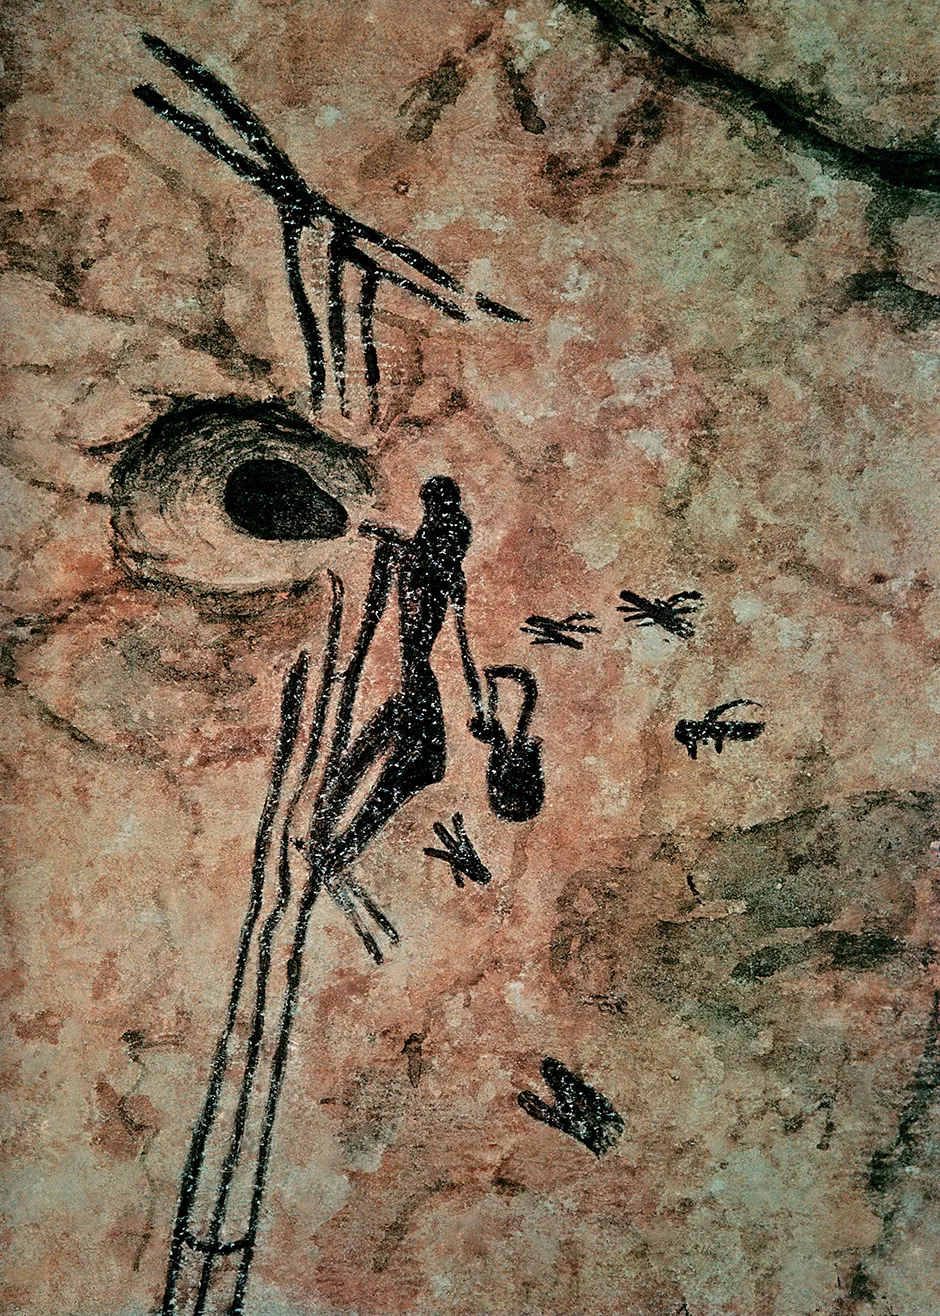 The Man of Bicorp, an 8,000-year-old cave painting, shows a person gathering honey from a beehive © Alamy